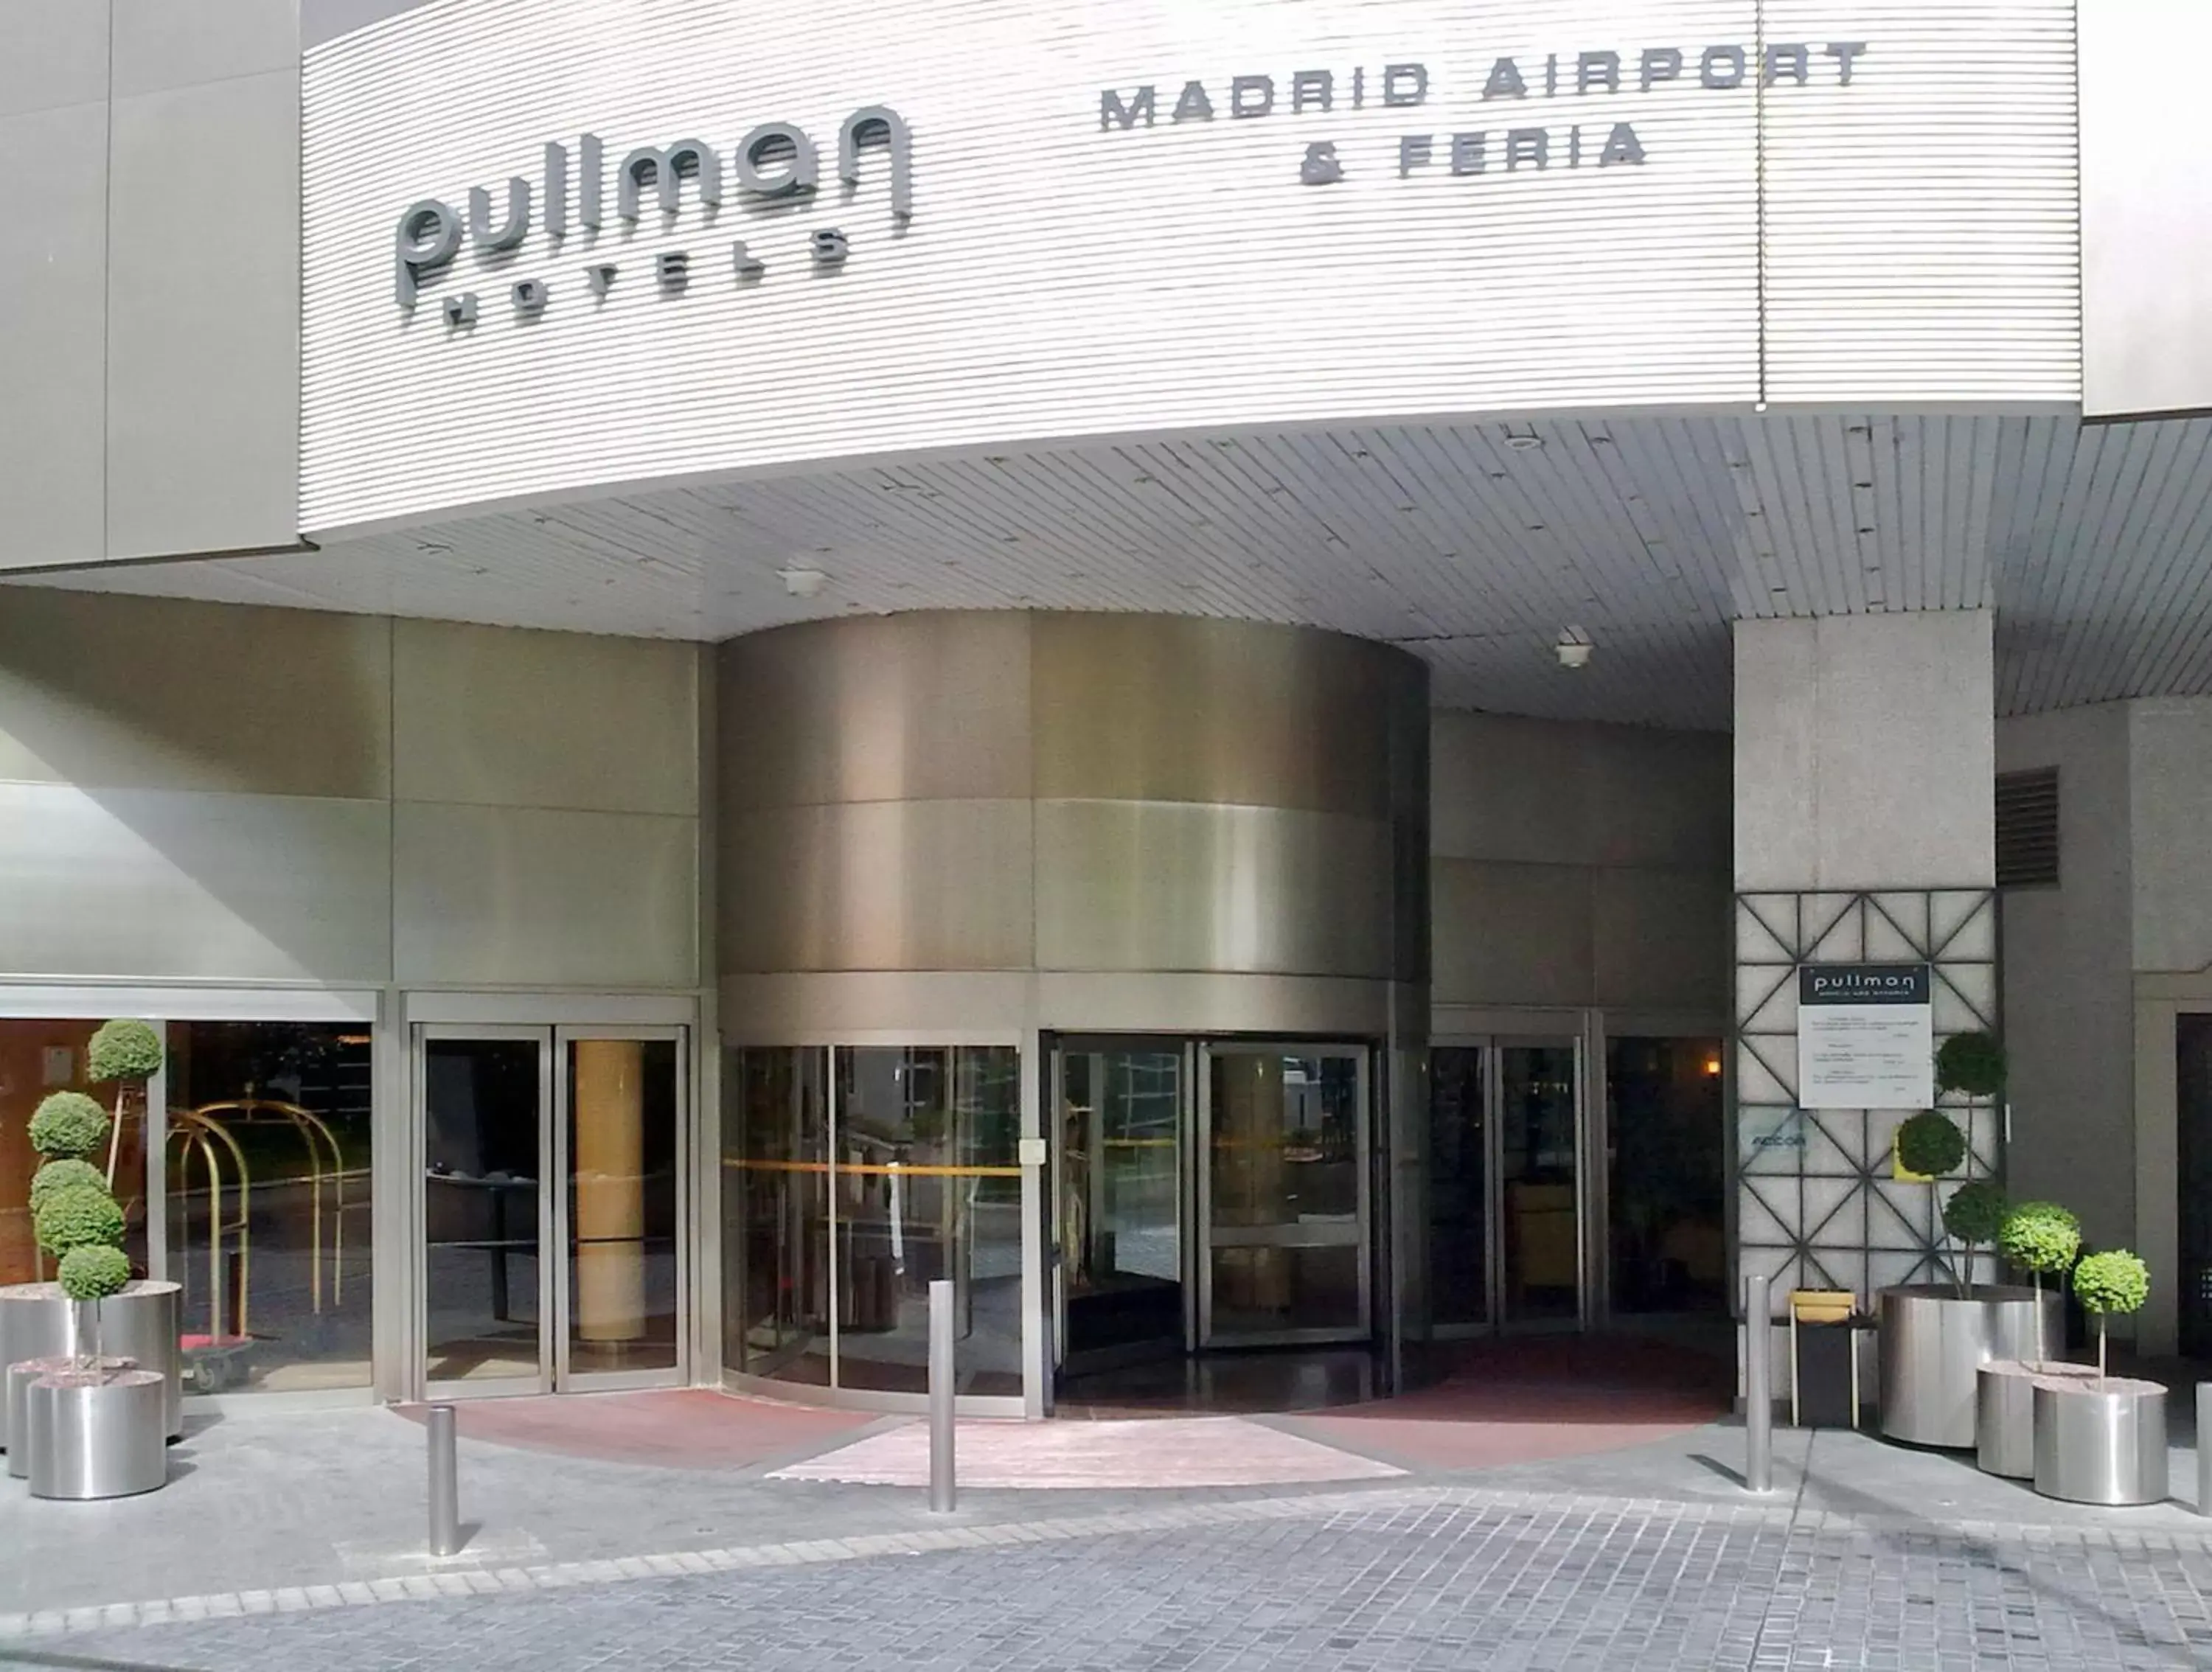 Property Building in Pullman Madrid Airport & Feria